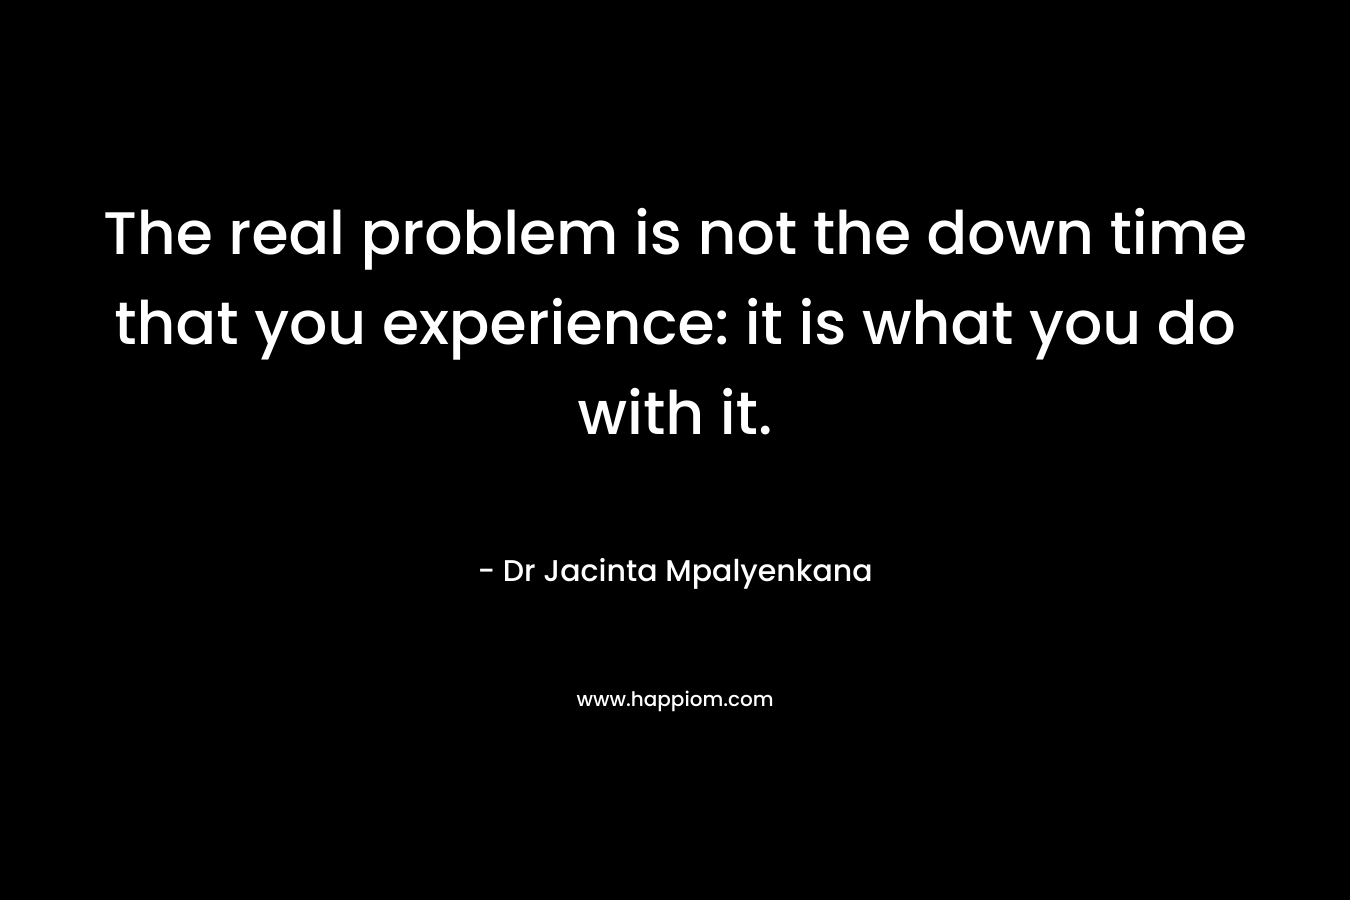 The real problem is not the down time that you experience: it is what you do with it.